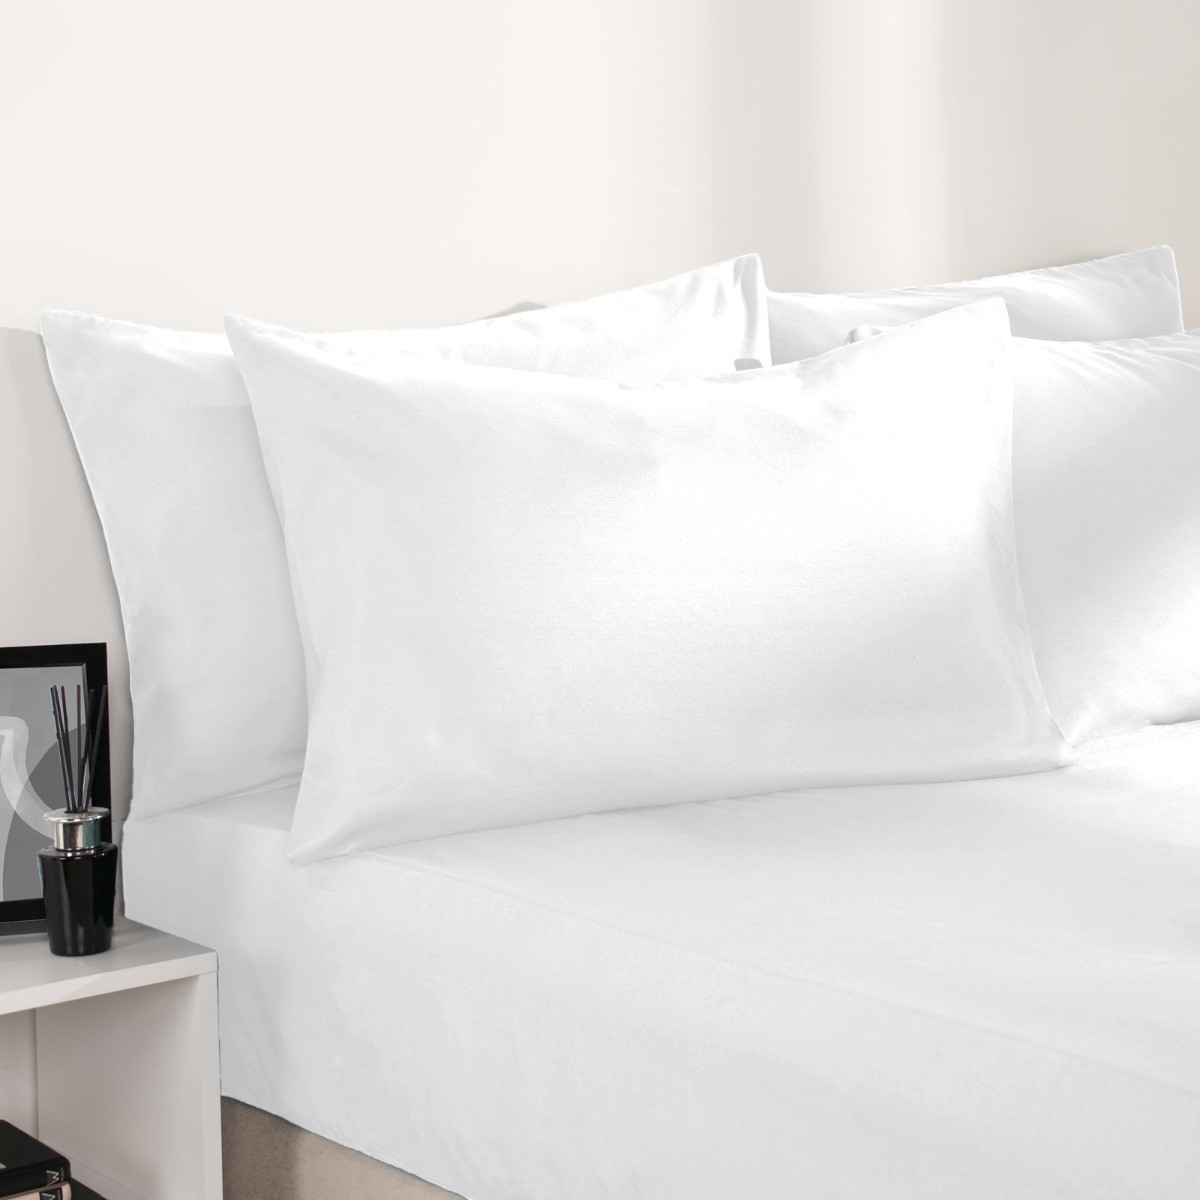 Brentfords Plain Dye Bed Fitted Sheet Soft Microfibre - White - Superking Size>